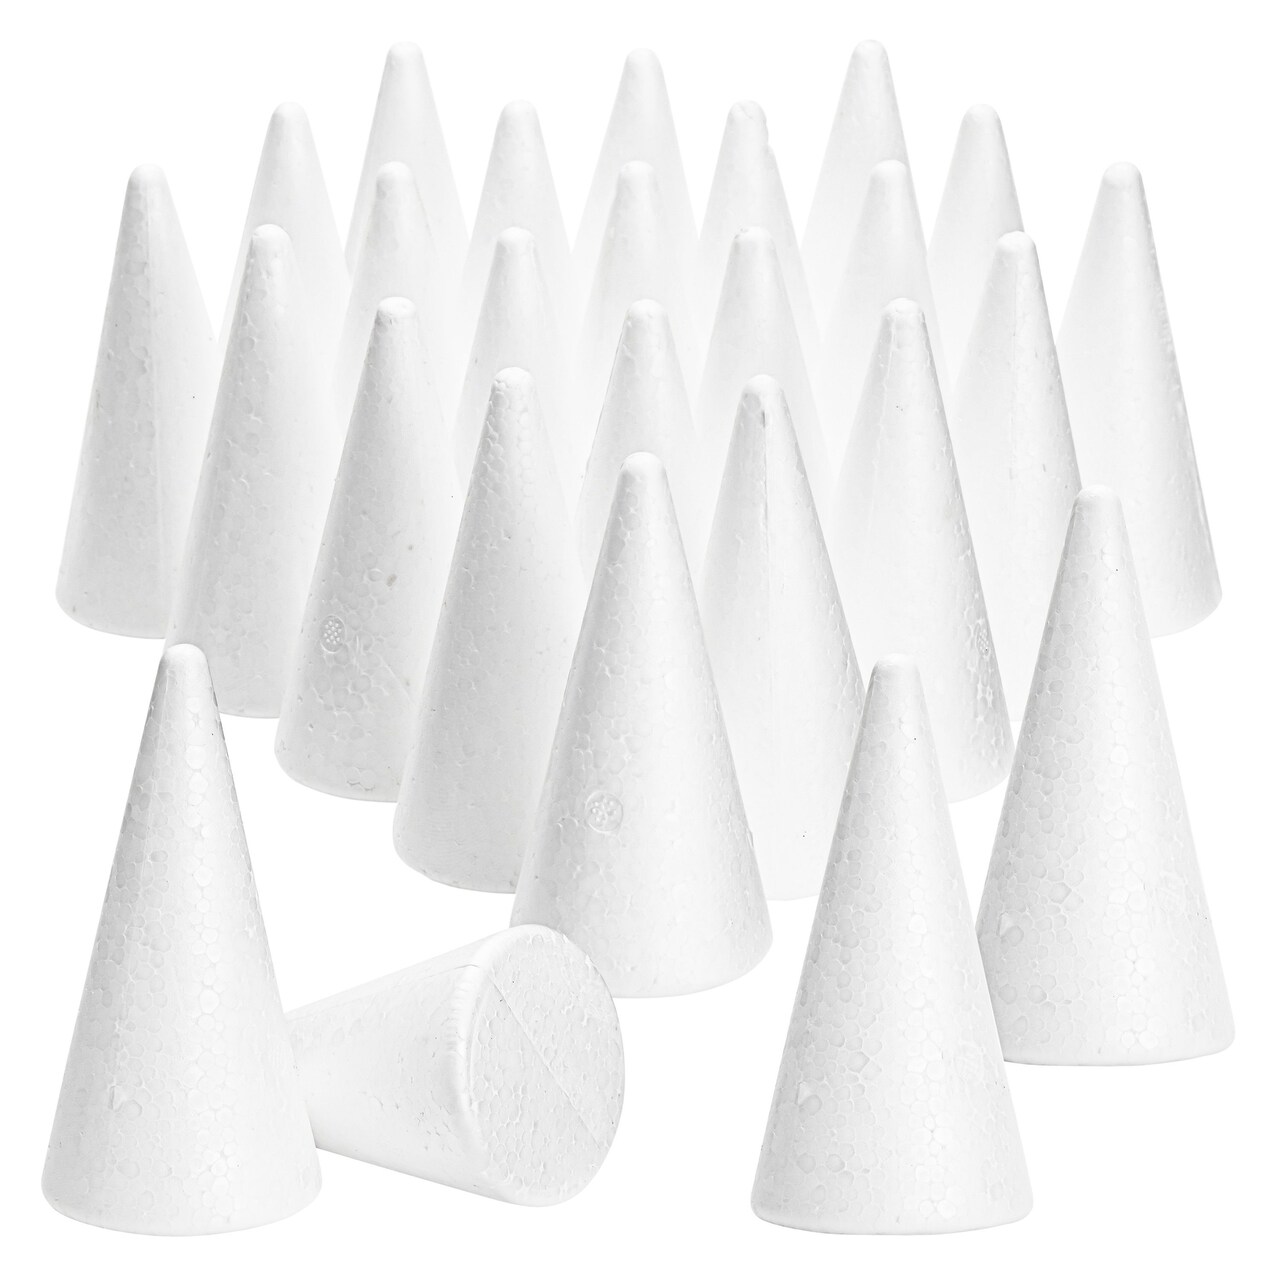 24 Pack Foam Cones for Crafts, DIY Art Projects, Handmade Gnomes